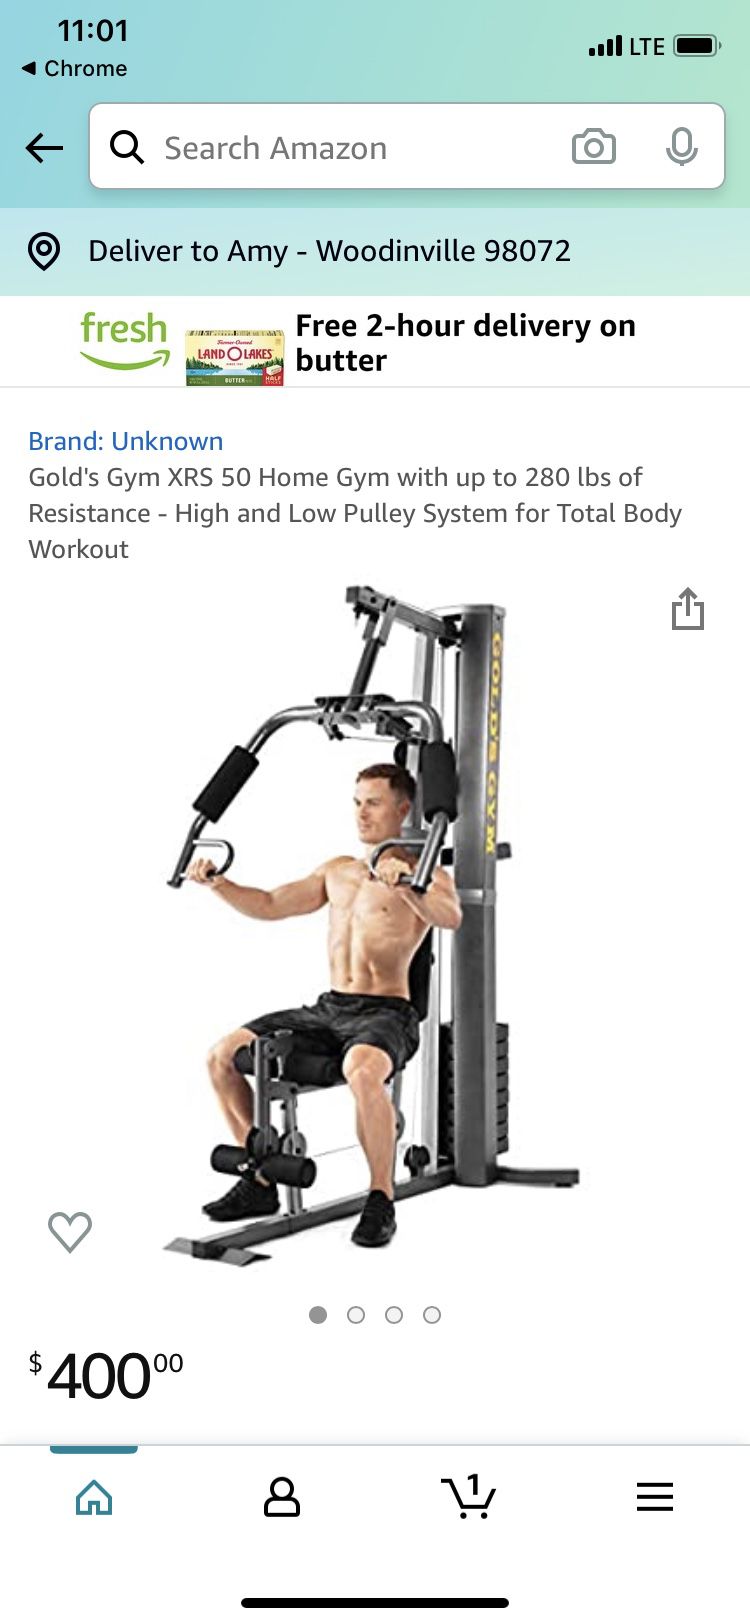 Used and in mint condition Gold’s Gym XR5 50 home gym system